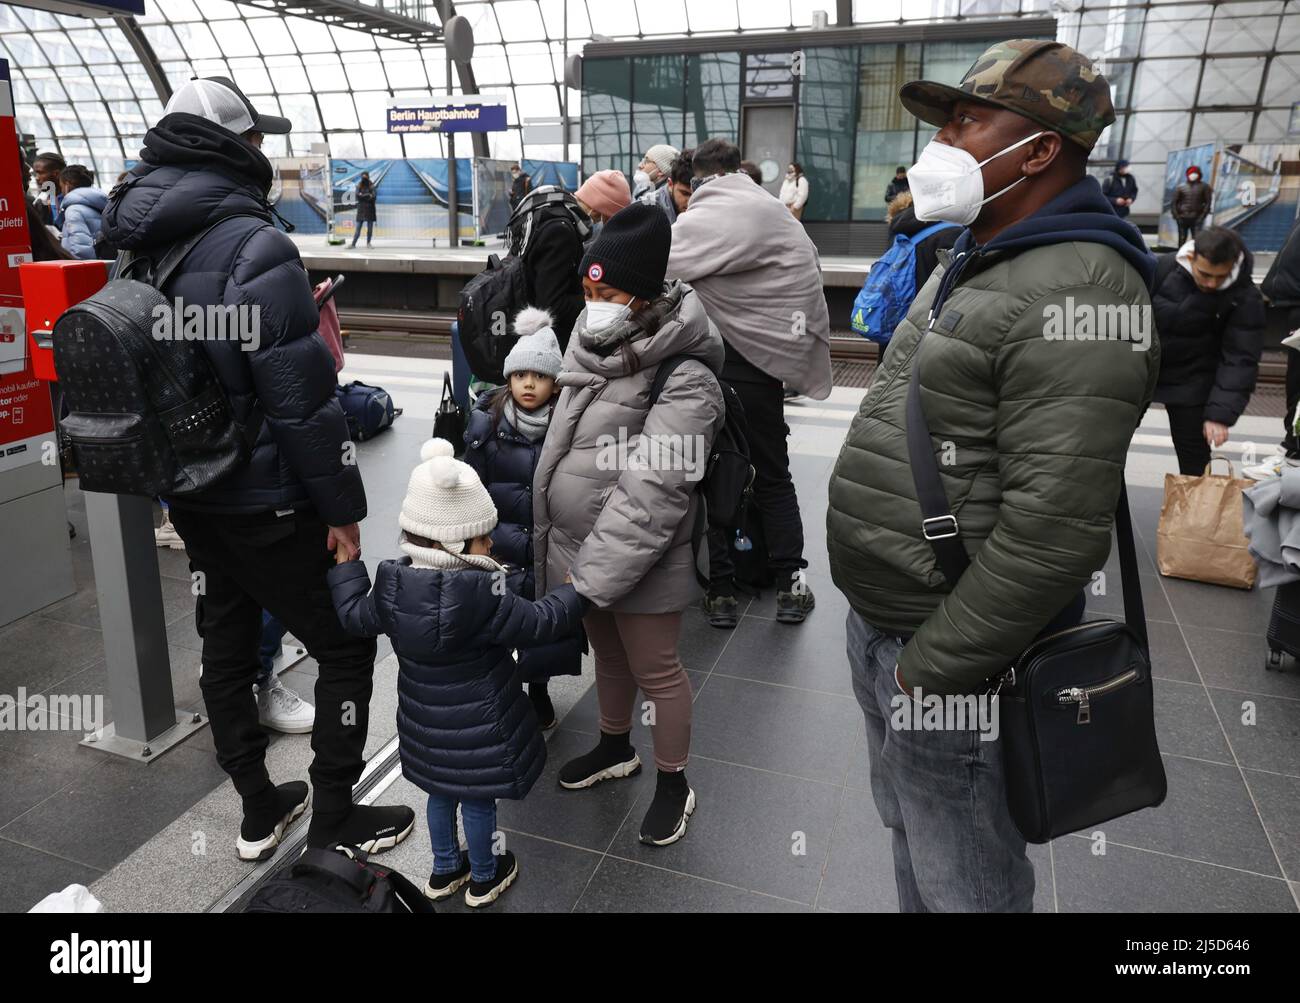 Berlin, 03.03.2022 - Refugees from Ukraine wait for a connecting train at Berlin's main train station. Thousands of refugees from Ukraine have already arrived in Germany. [automated translation] Stock Photo